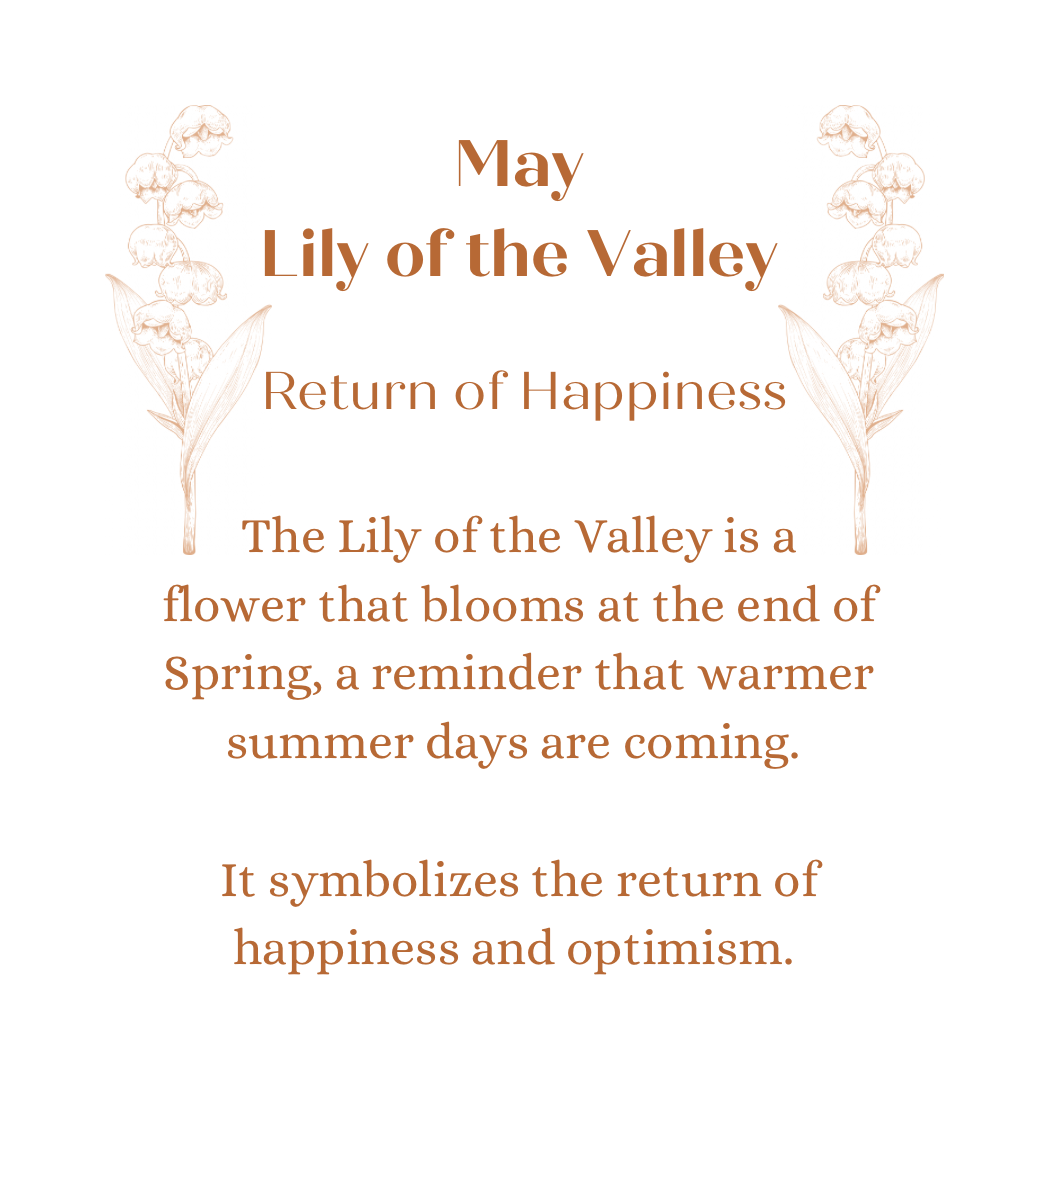 May Lily of the Valley in Luna